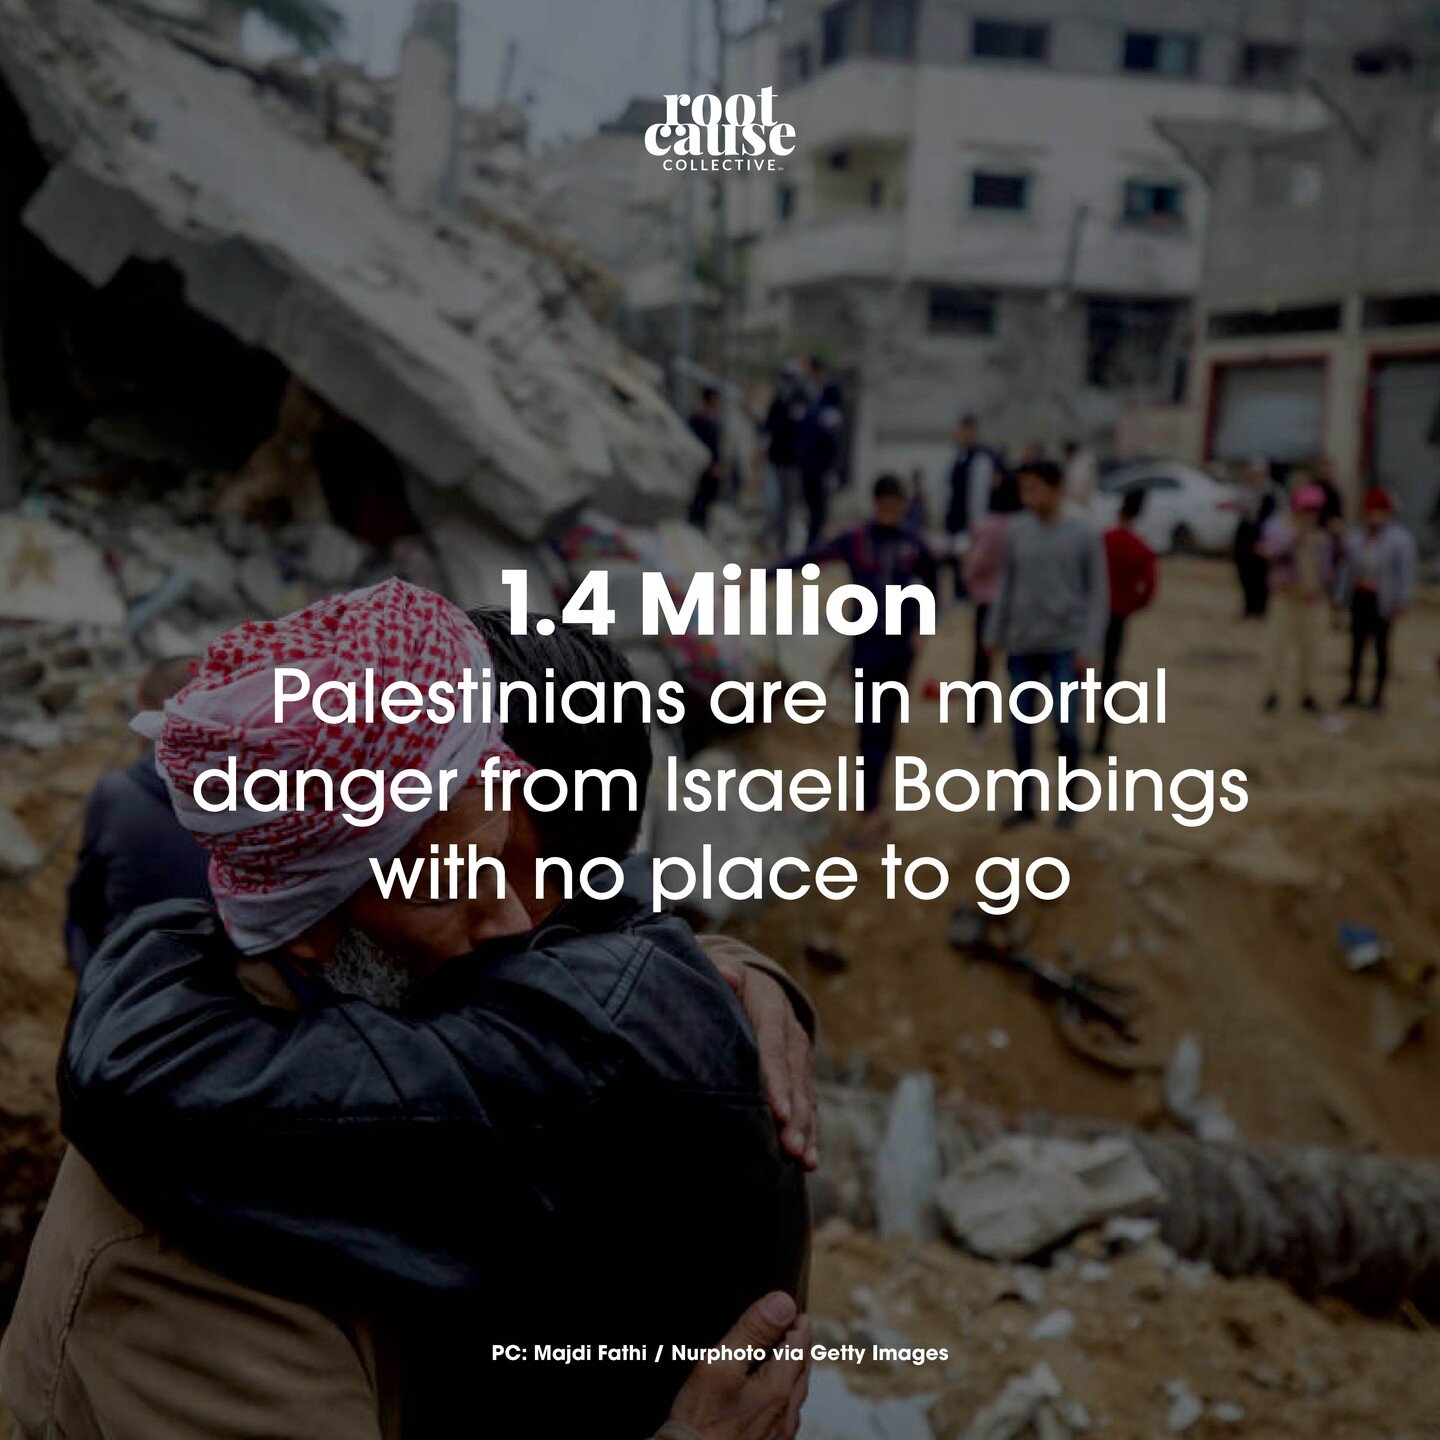 1.4 Million Palestinians are in mortal danger from Israeli Bombings. They have nowhere else to go. As healers we help people heal from traumatic experiences. As siblings of the human race we have to do our part to prevent trauma from happening all to